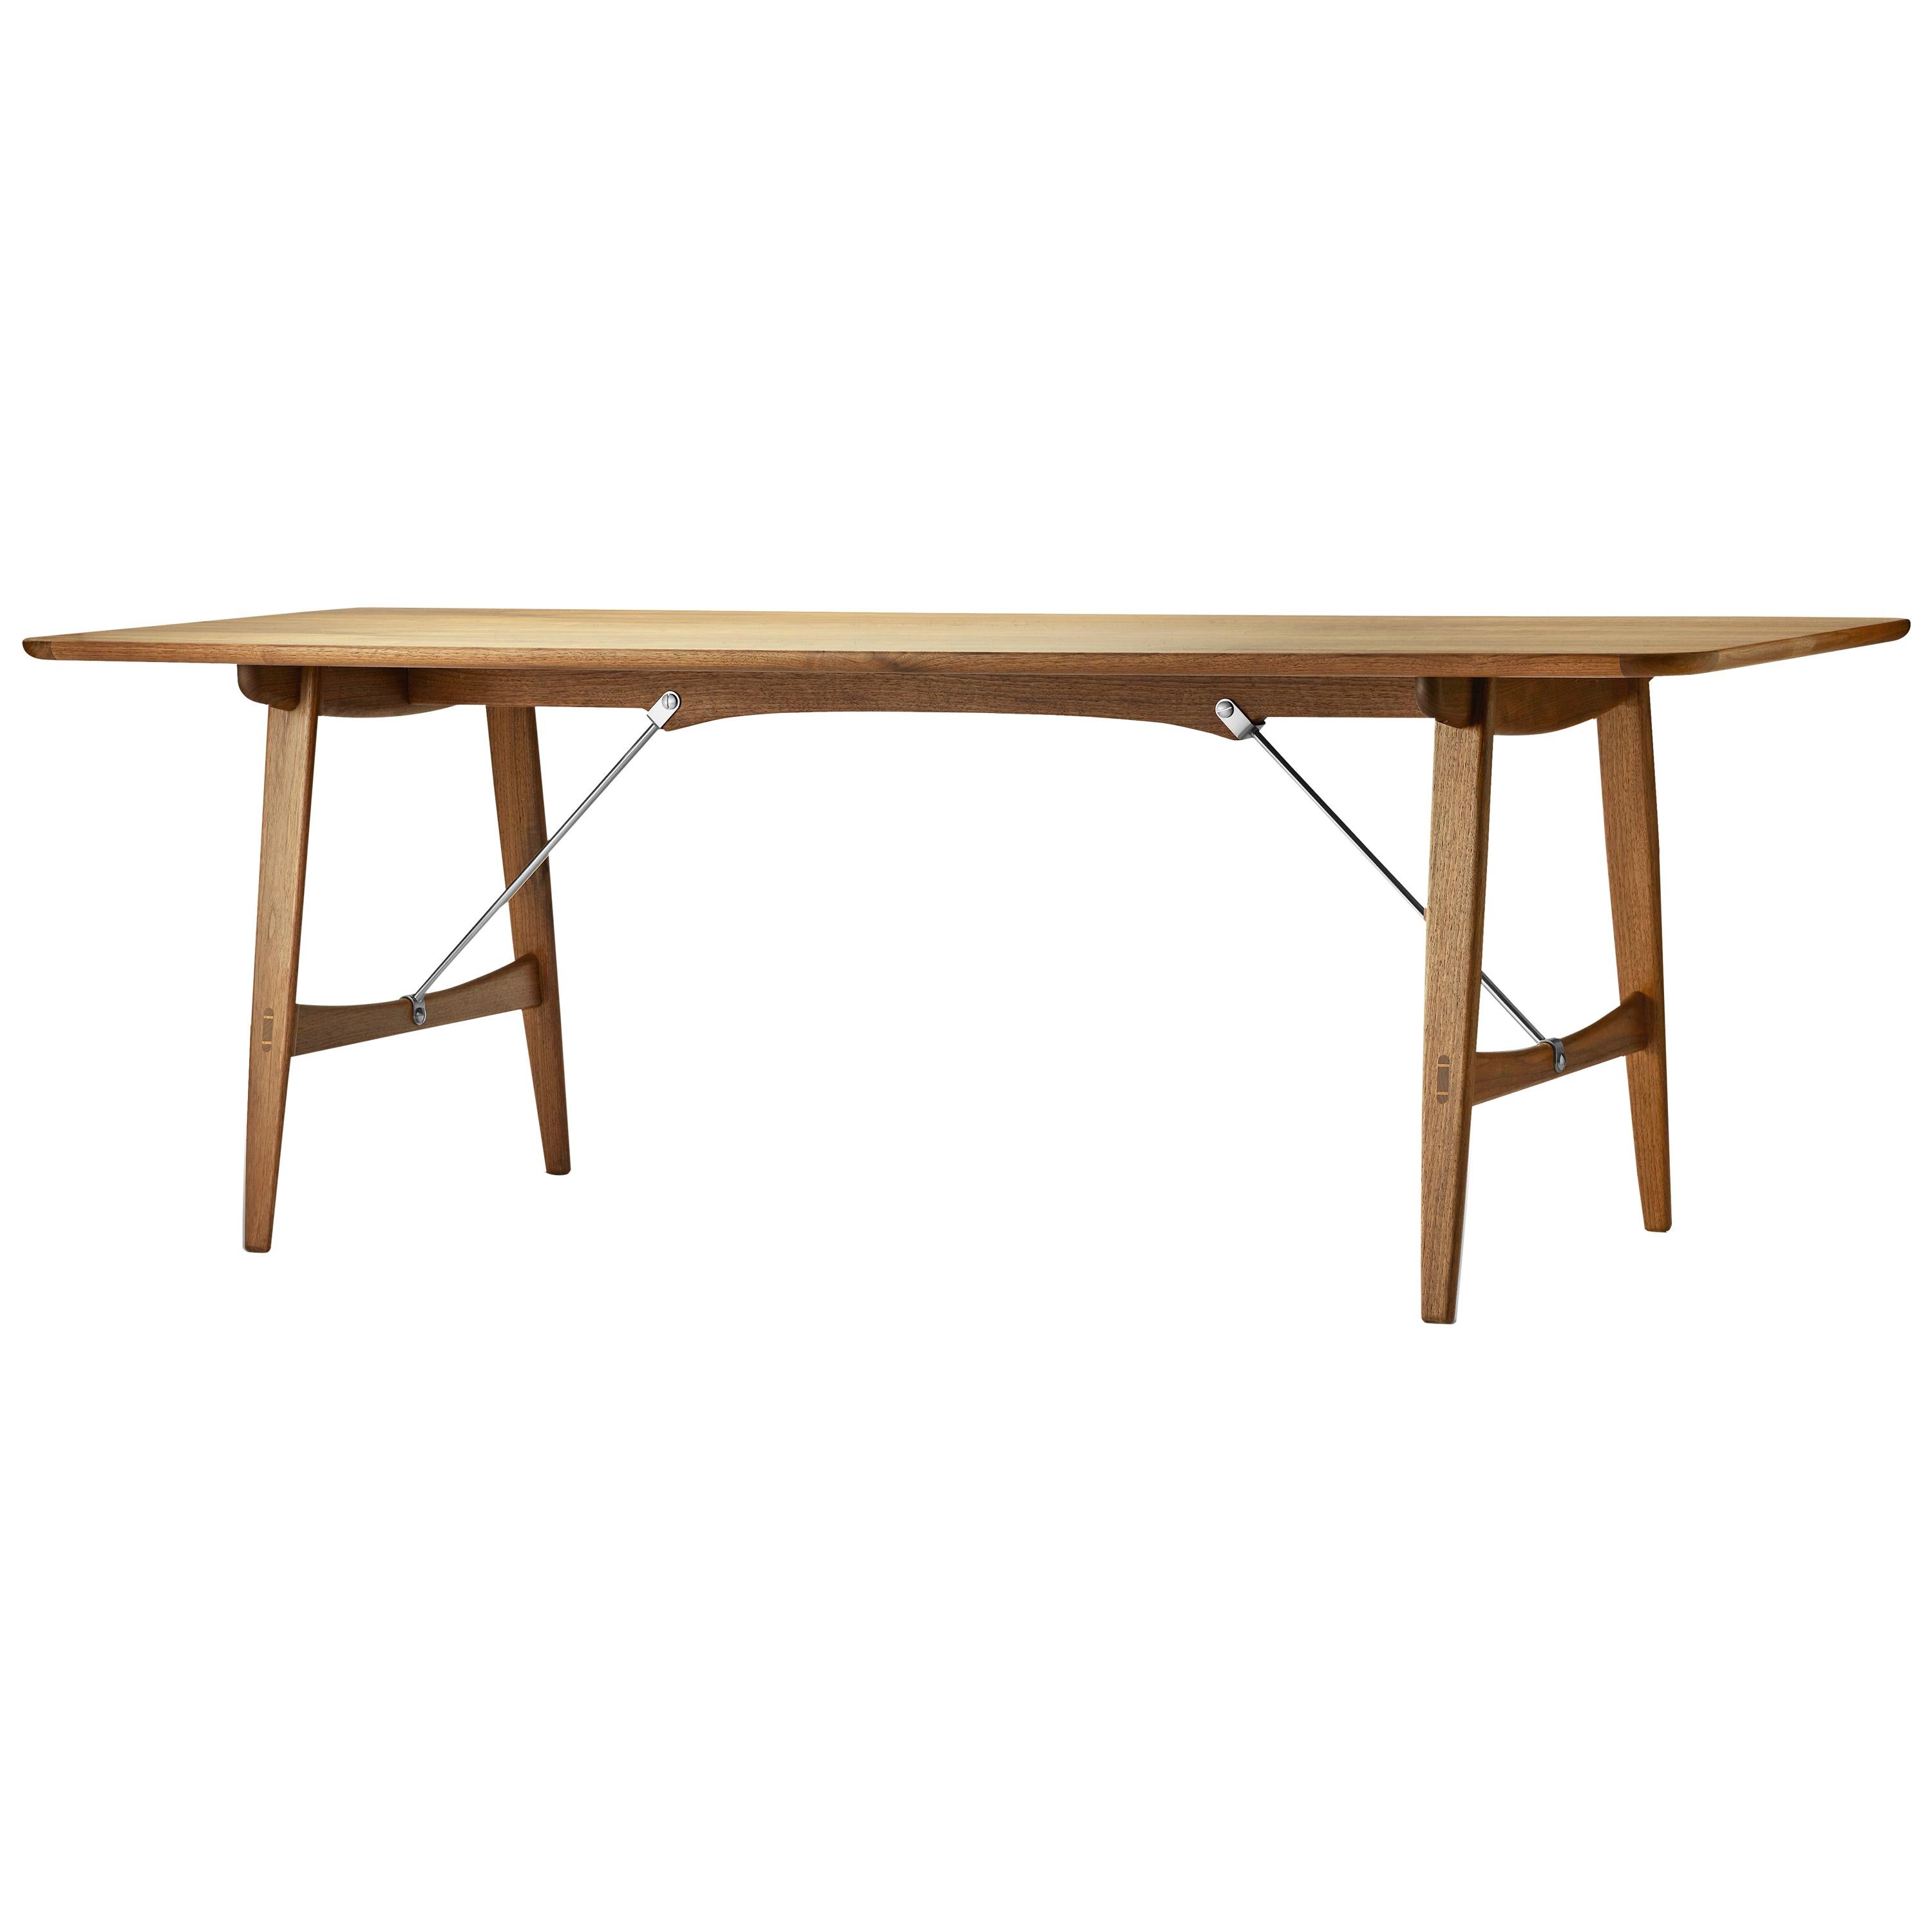 Brown (Oak Oil) BM1160 Hunting Table in Wood with Stainless Steel Cross Bars by Børge Mogensen